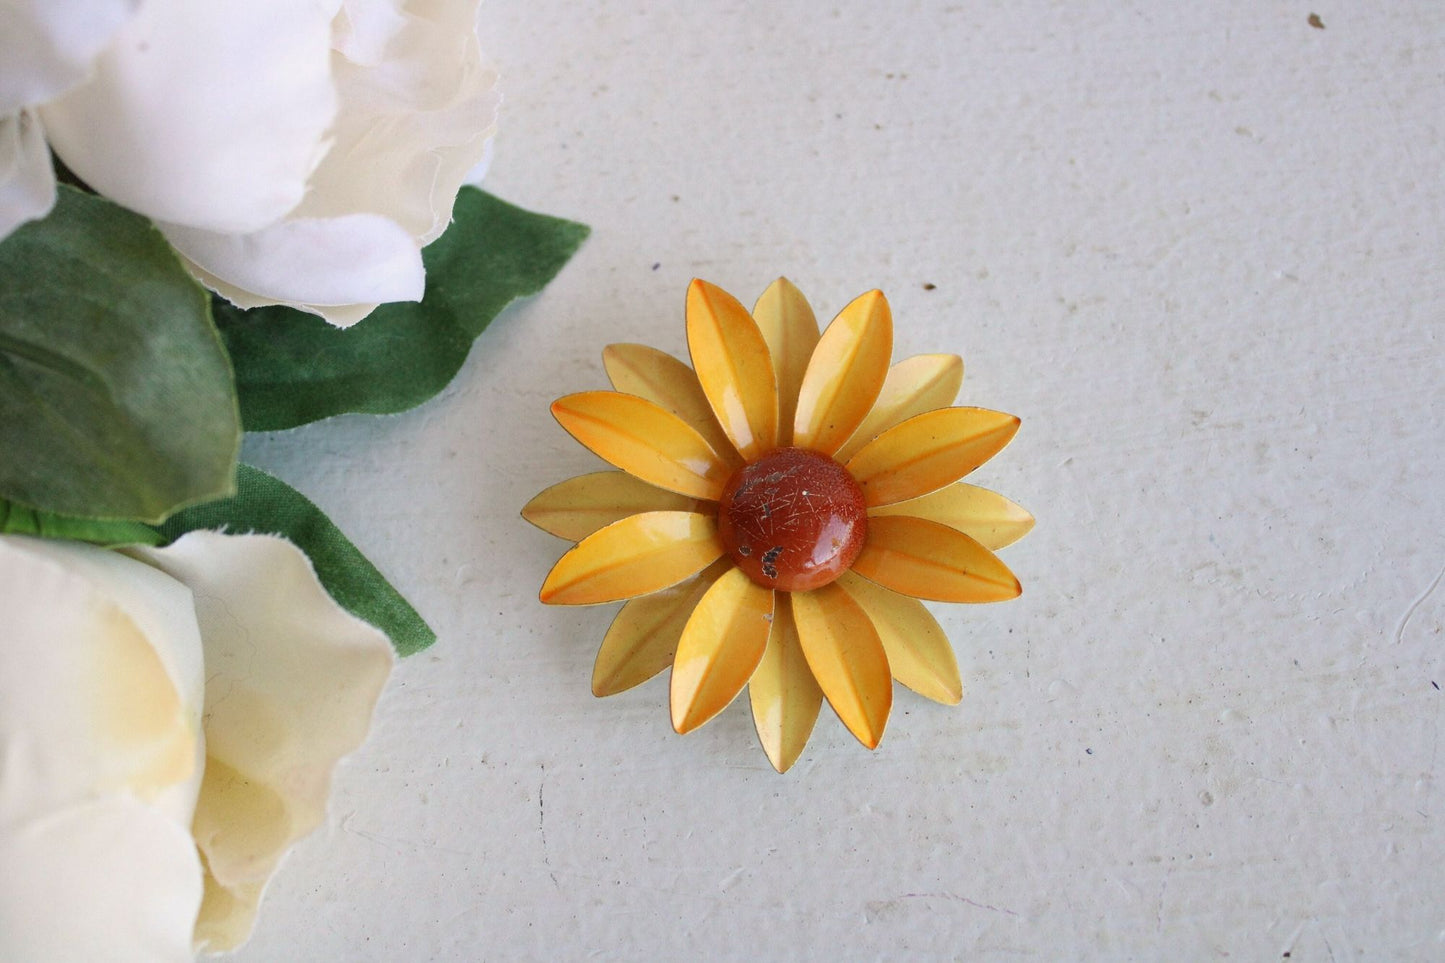 Vintage 1960s Sunflower Brooch in Yellow and Brown